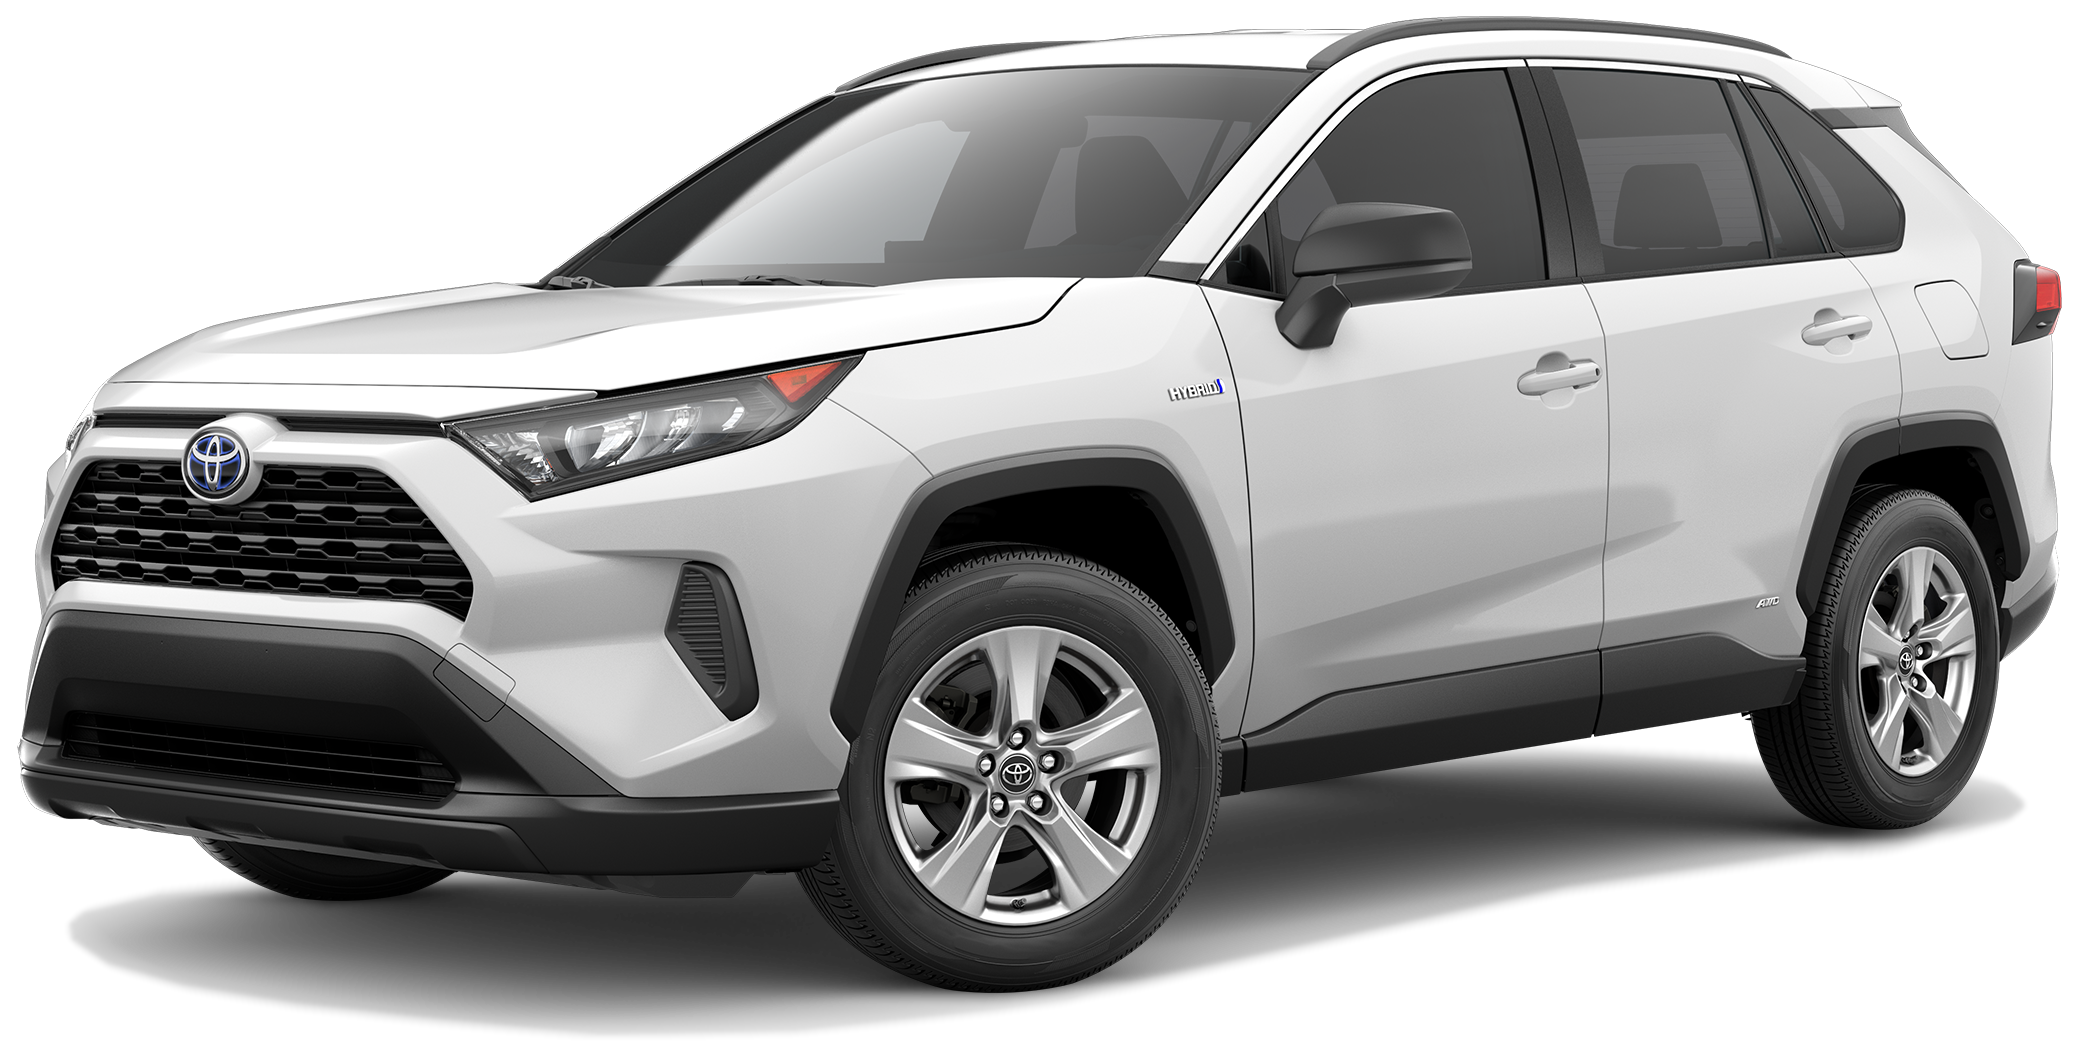 2021 Toyota RAV4 Hybrid Incentives, Specials & Offers in Ledgewood NJ